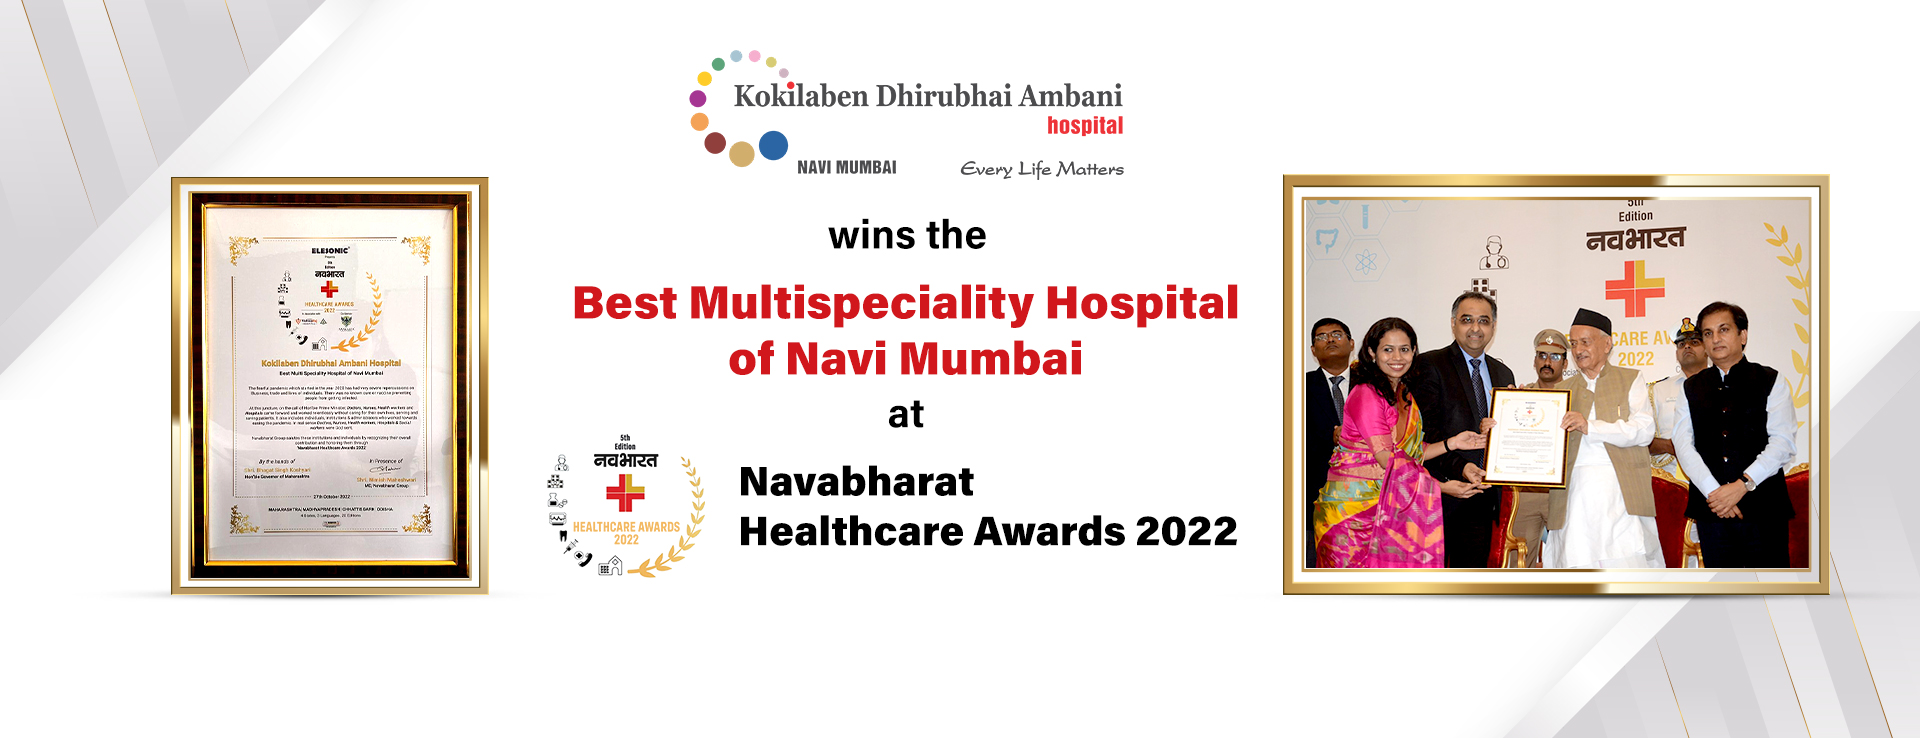 KDAH wins the Best Multispeciality Hospital of Western India